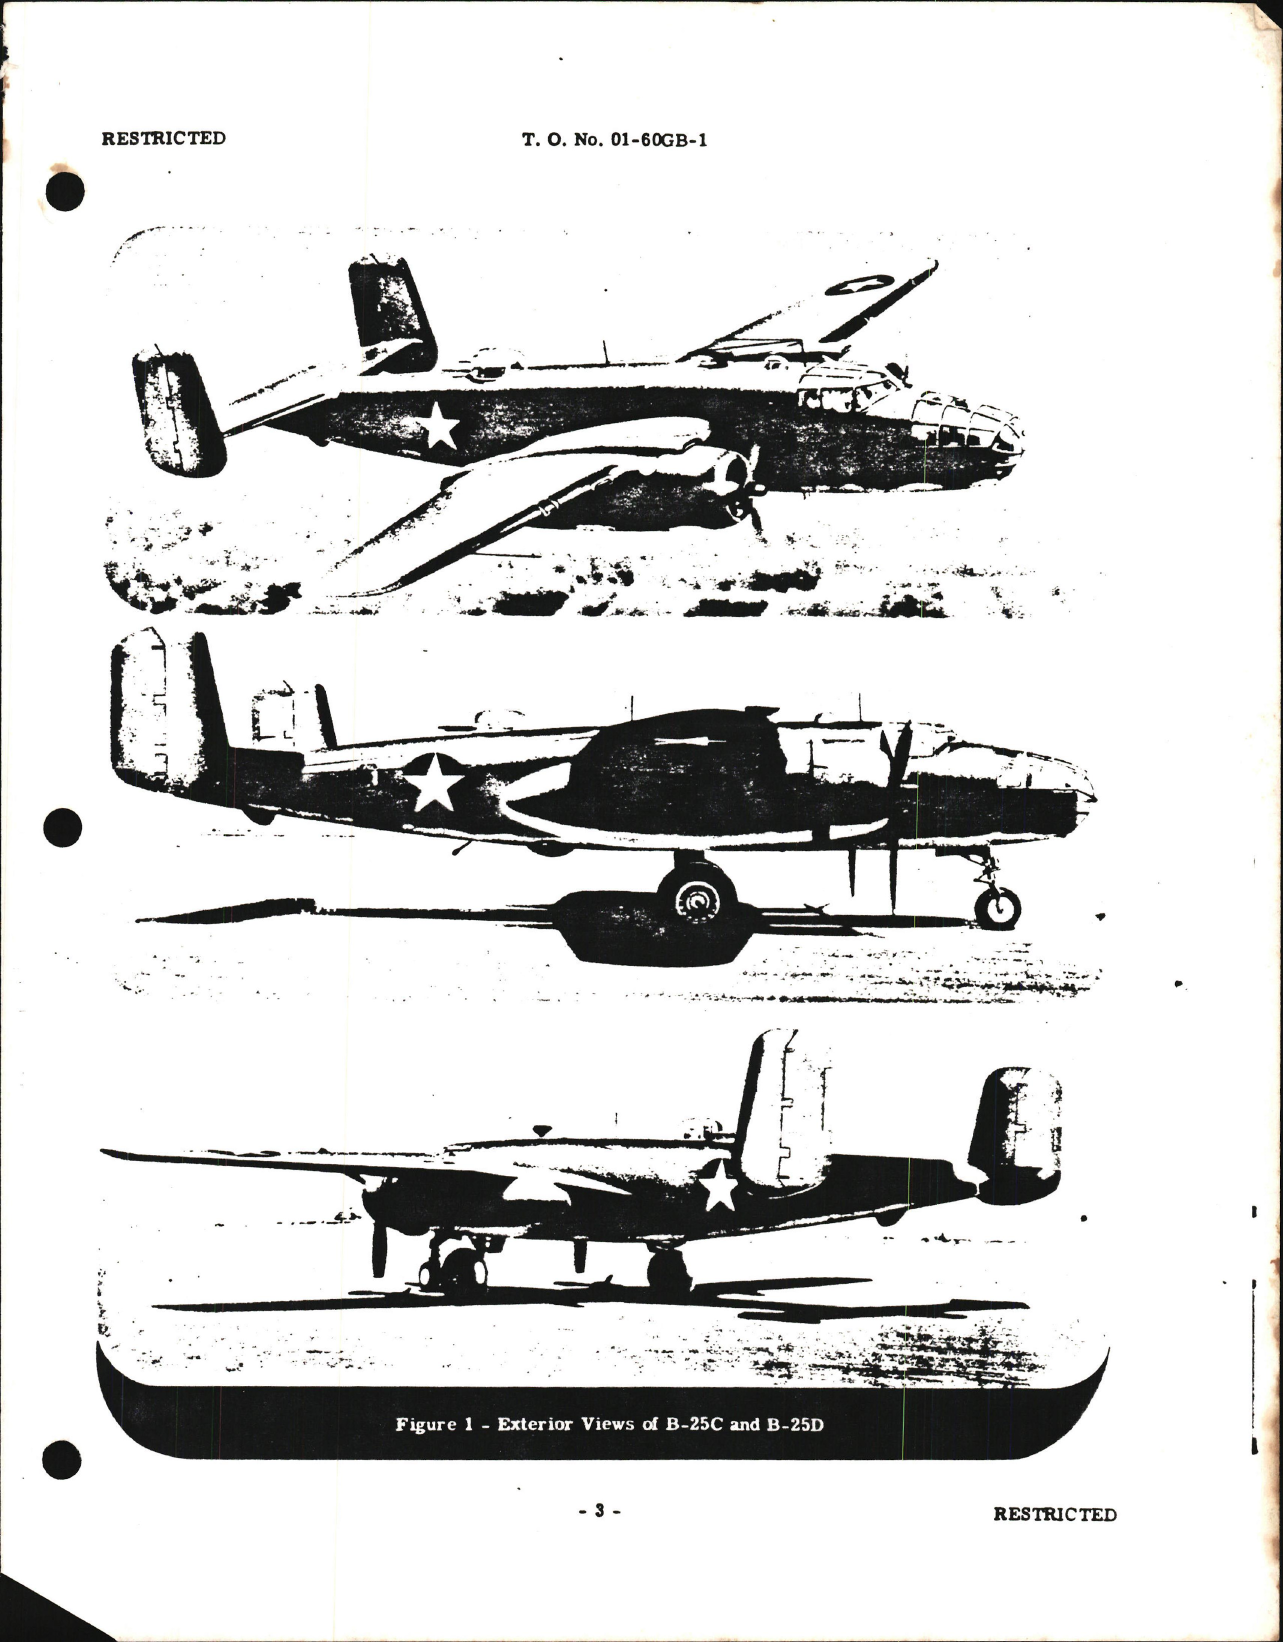 Sample page 5 from AirCorps Library document: Pilot's Handbook of Flight Operating Instructions for B-25C and B-25D